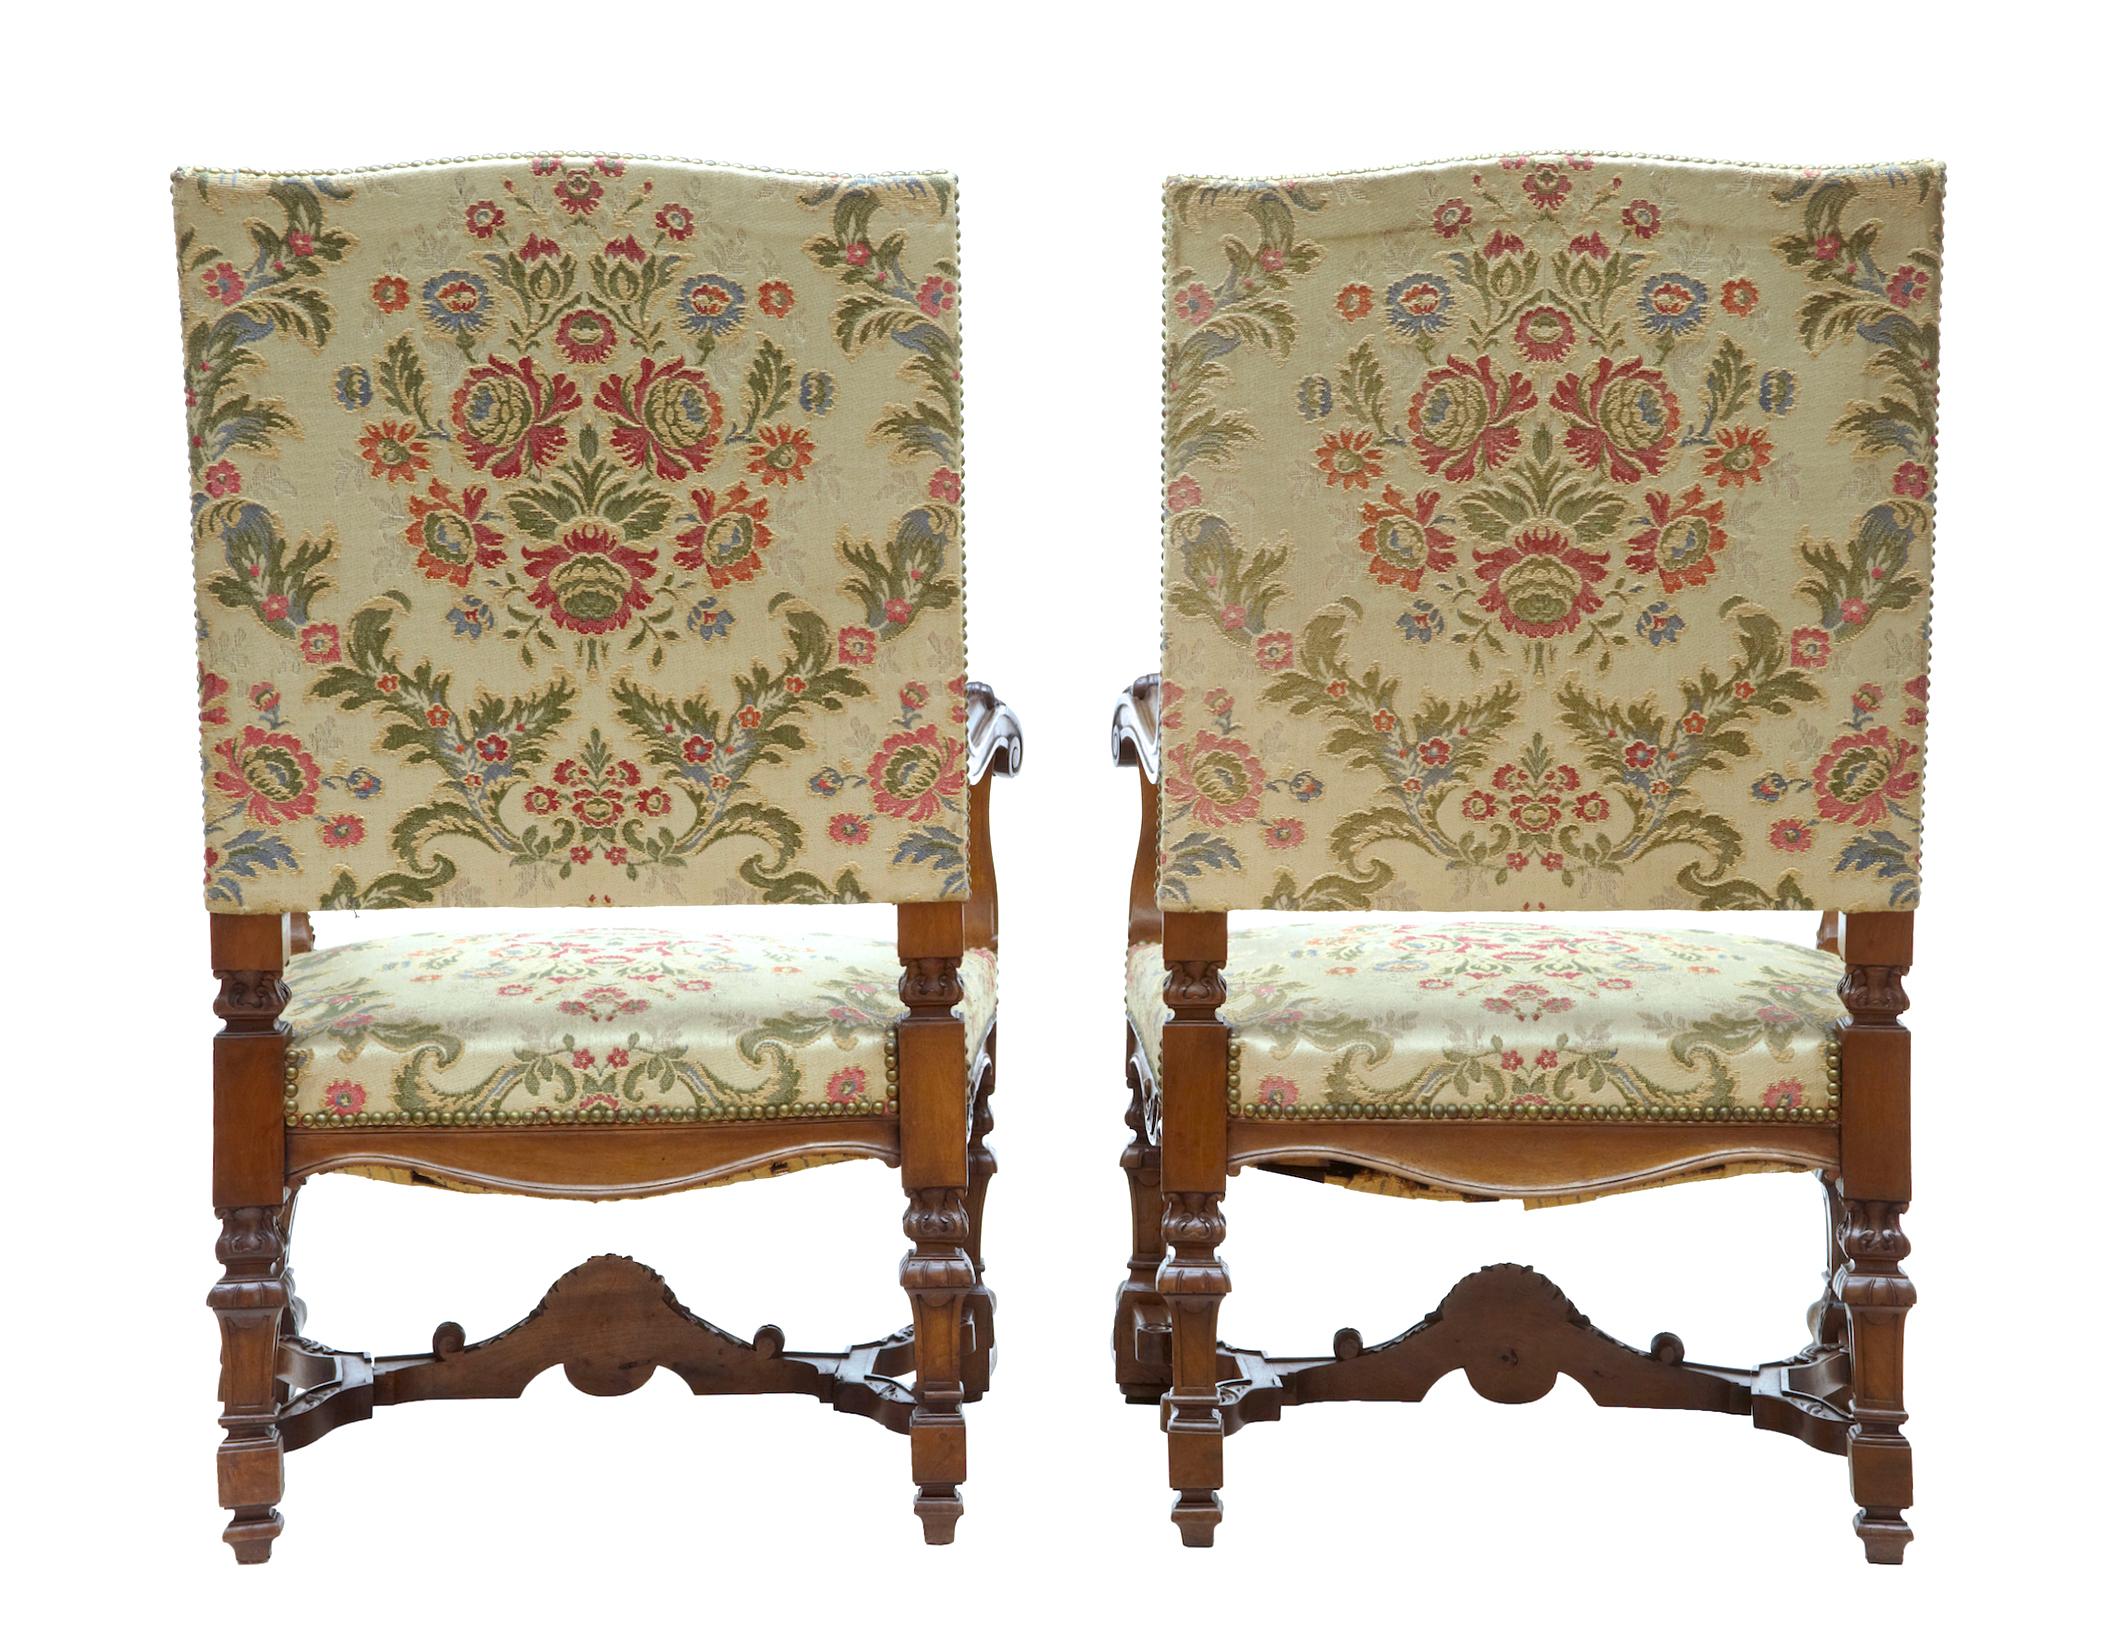 Rococo Revival Superb Pair of 19th Century Carved Walnut French Armchairs